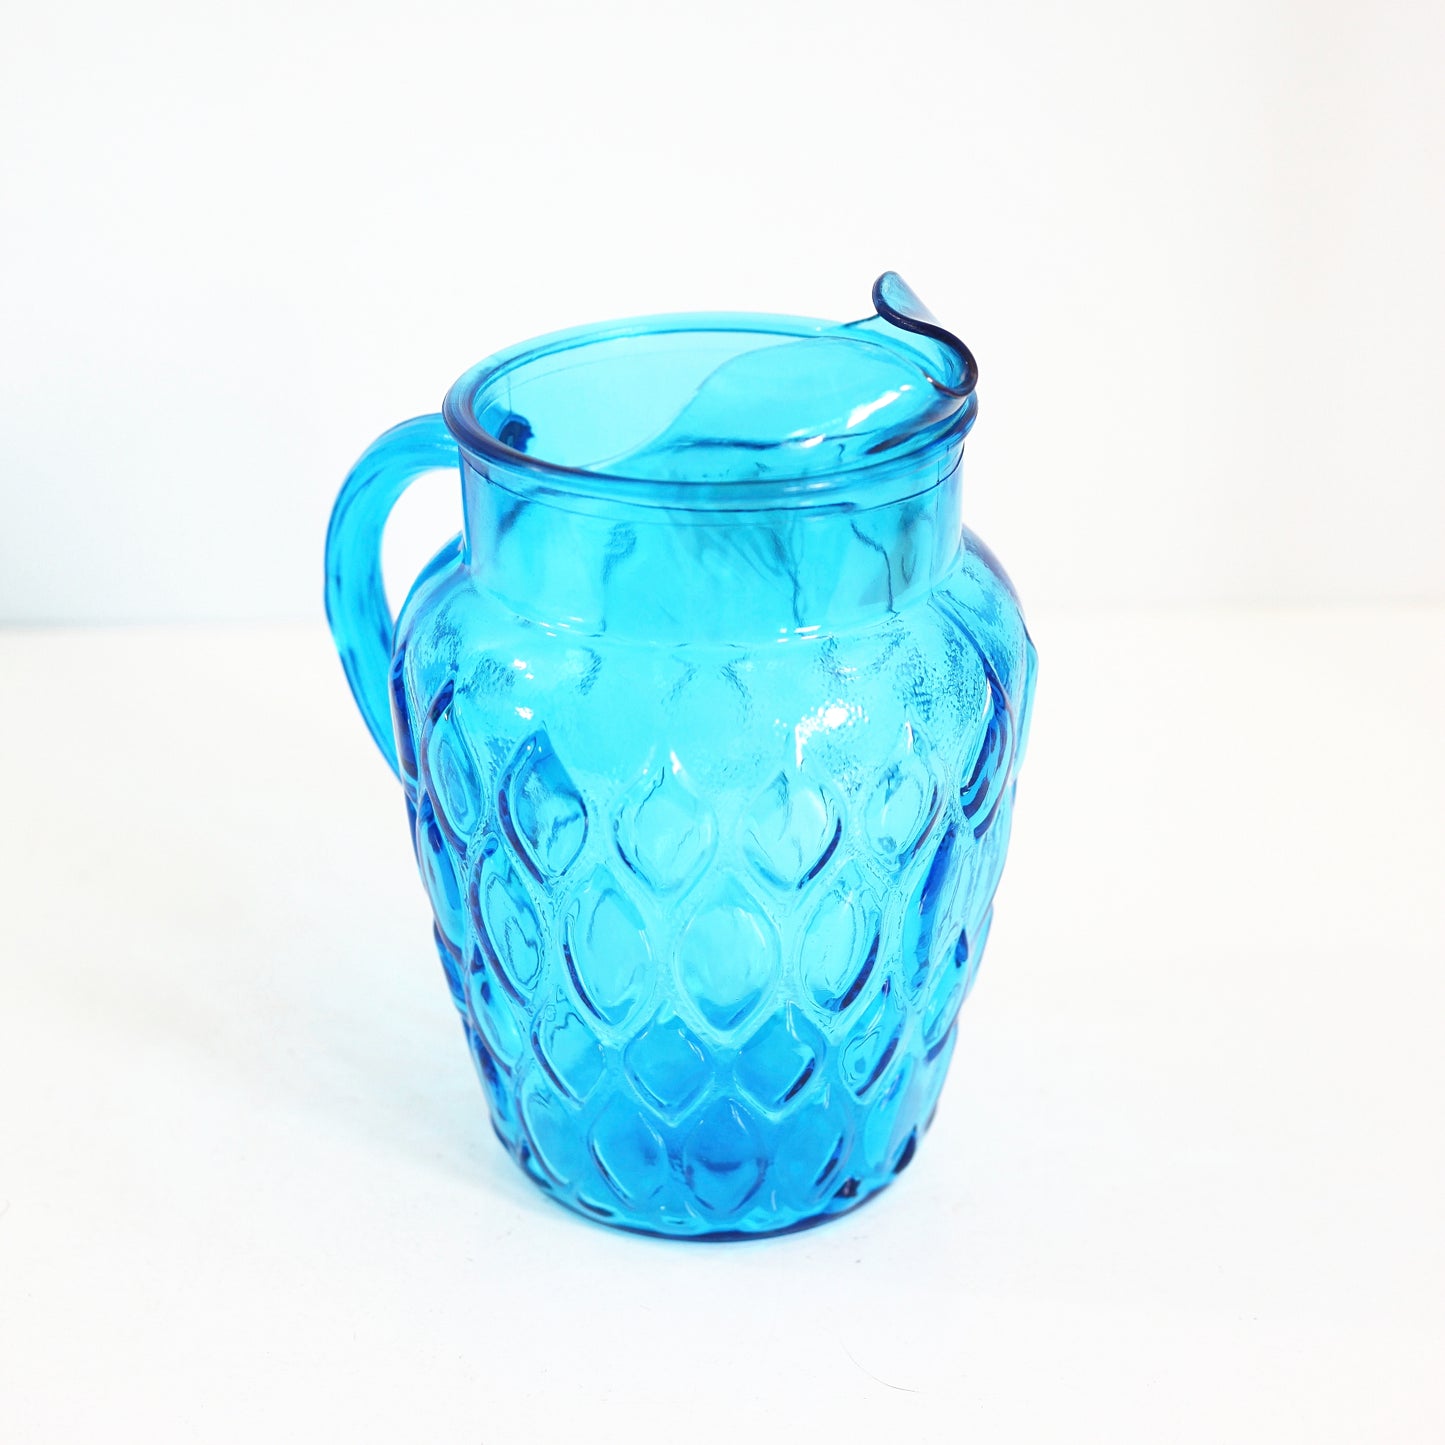 SOLD - Mid Century Turquoise Blue Madrid Pitcher by Anchor Hocking